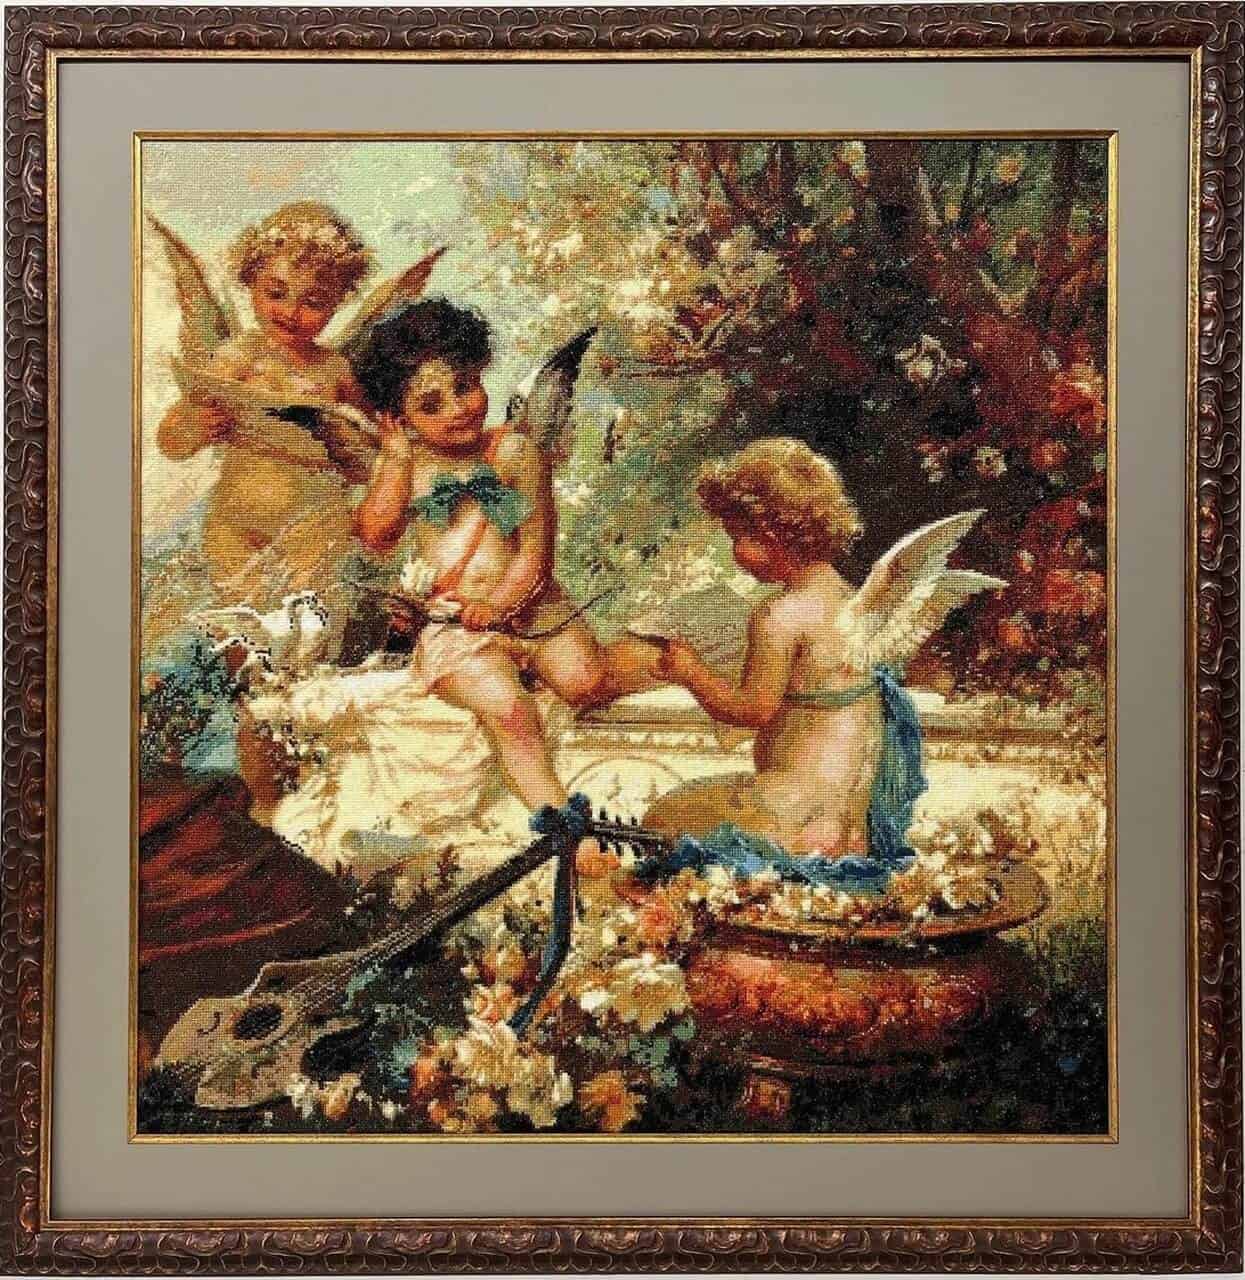 A framed cross-stitch of angels in a garden.